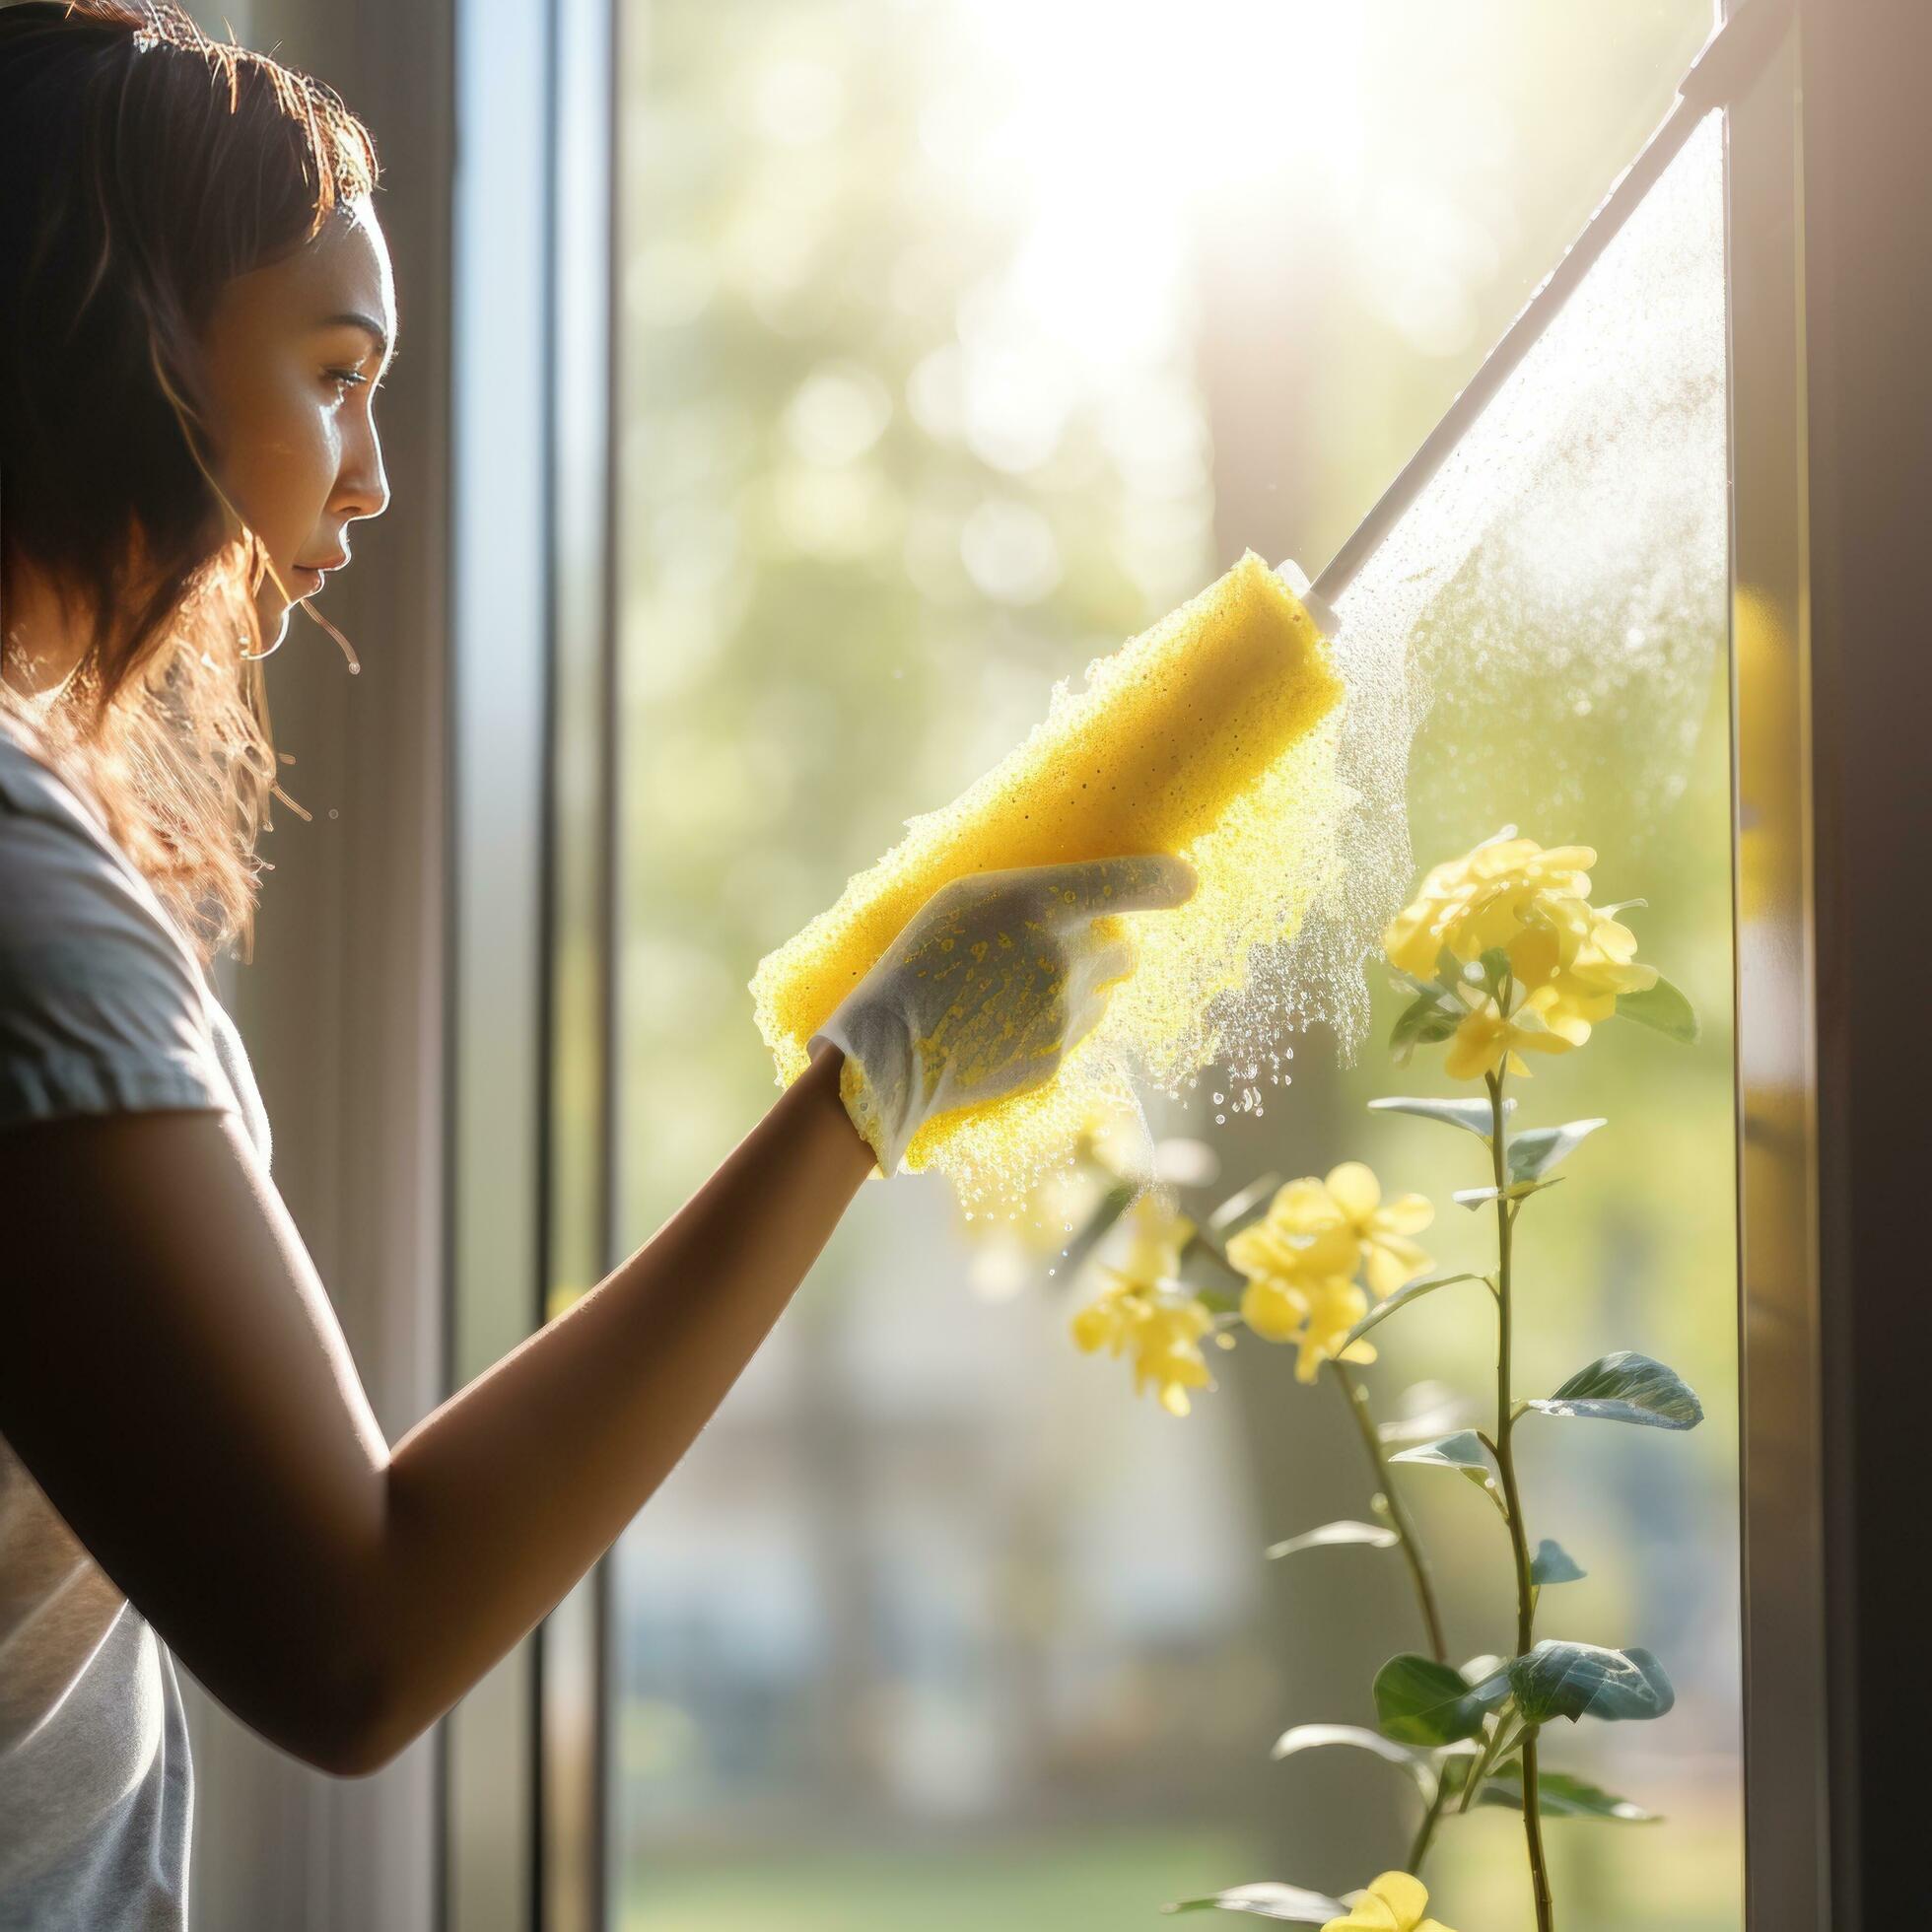 Window Cleaner. squeegee Stock Photo